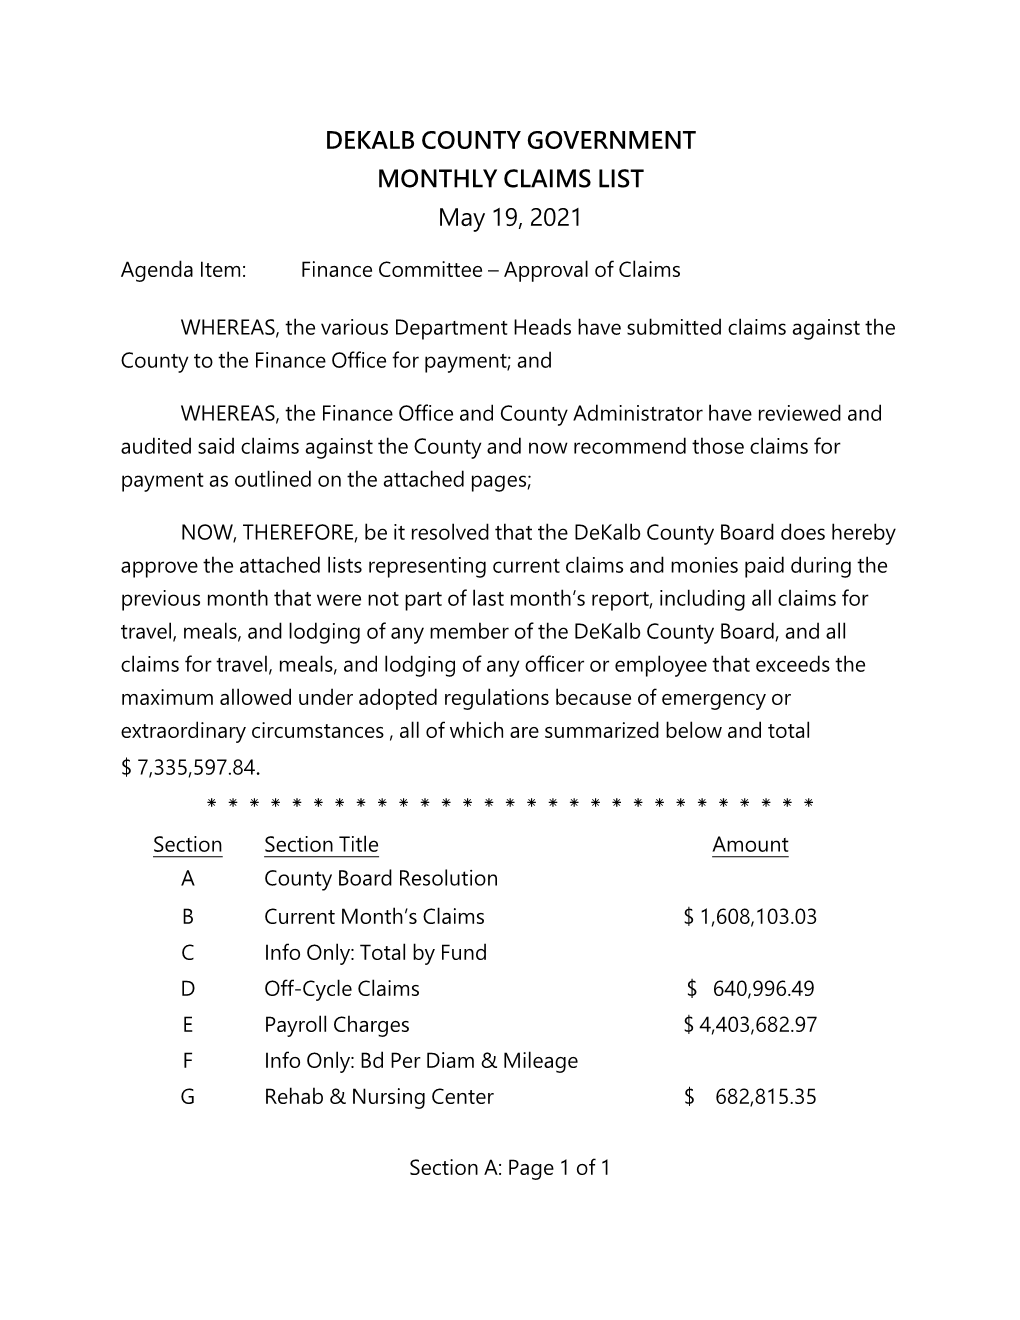 DEKALB COUNTY GOVERNMENT MONTHLY CLAIMS LIST May 19, 2021